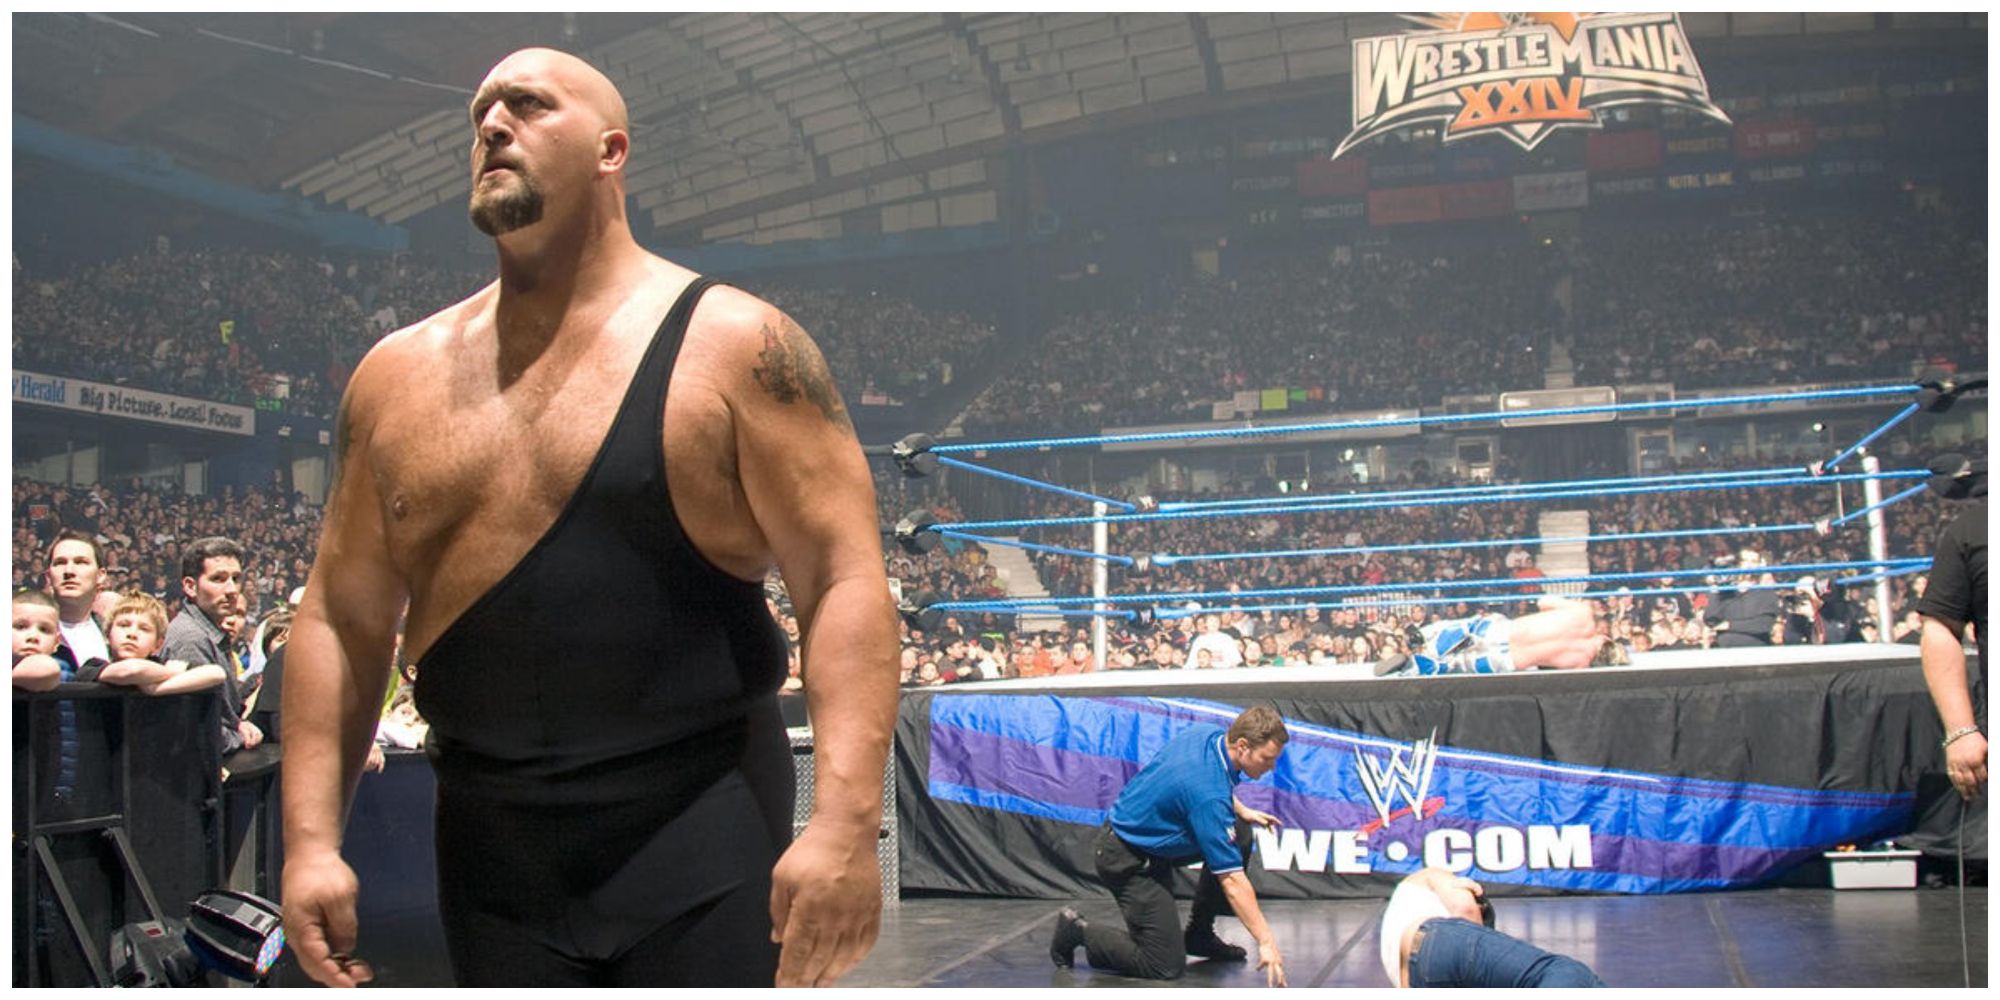 Big Show walking away from the WWE ring with another wrestler lying in the background.